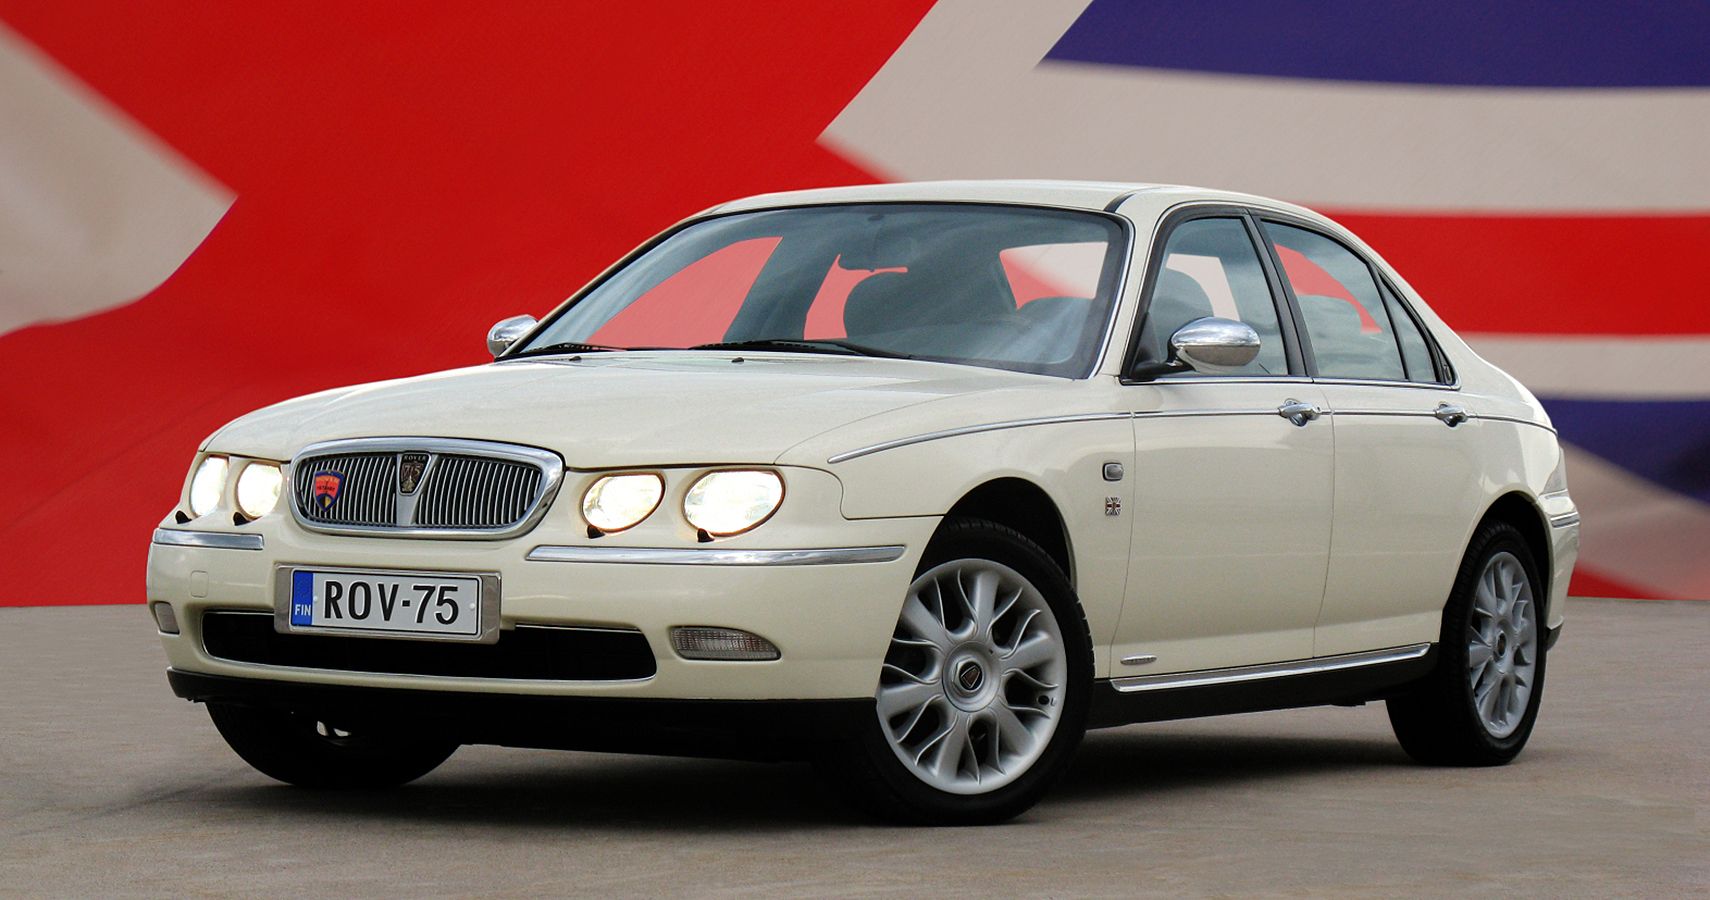 We Can Do Without The Rover 75 V8, UK